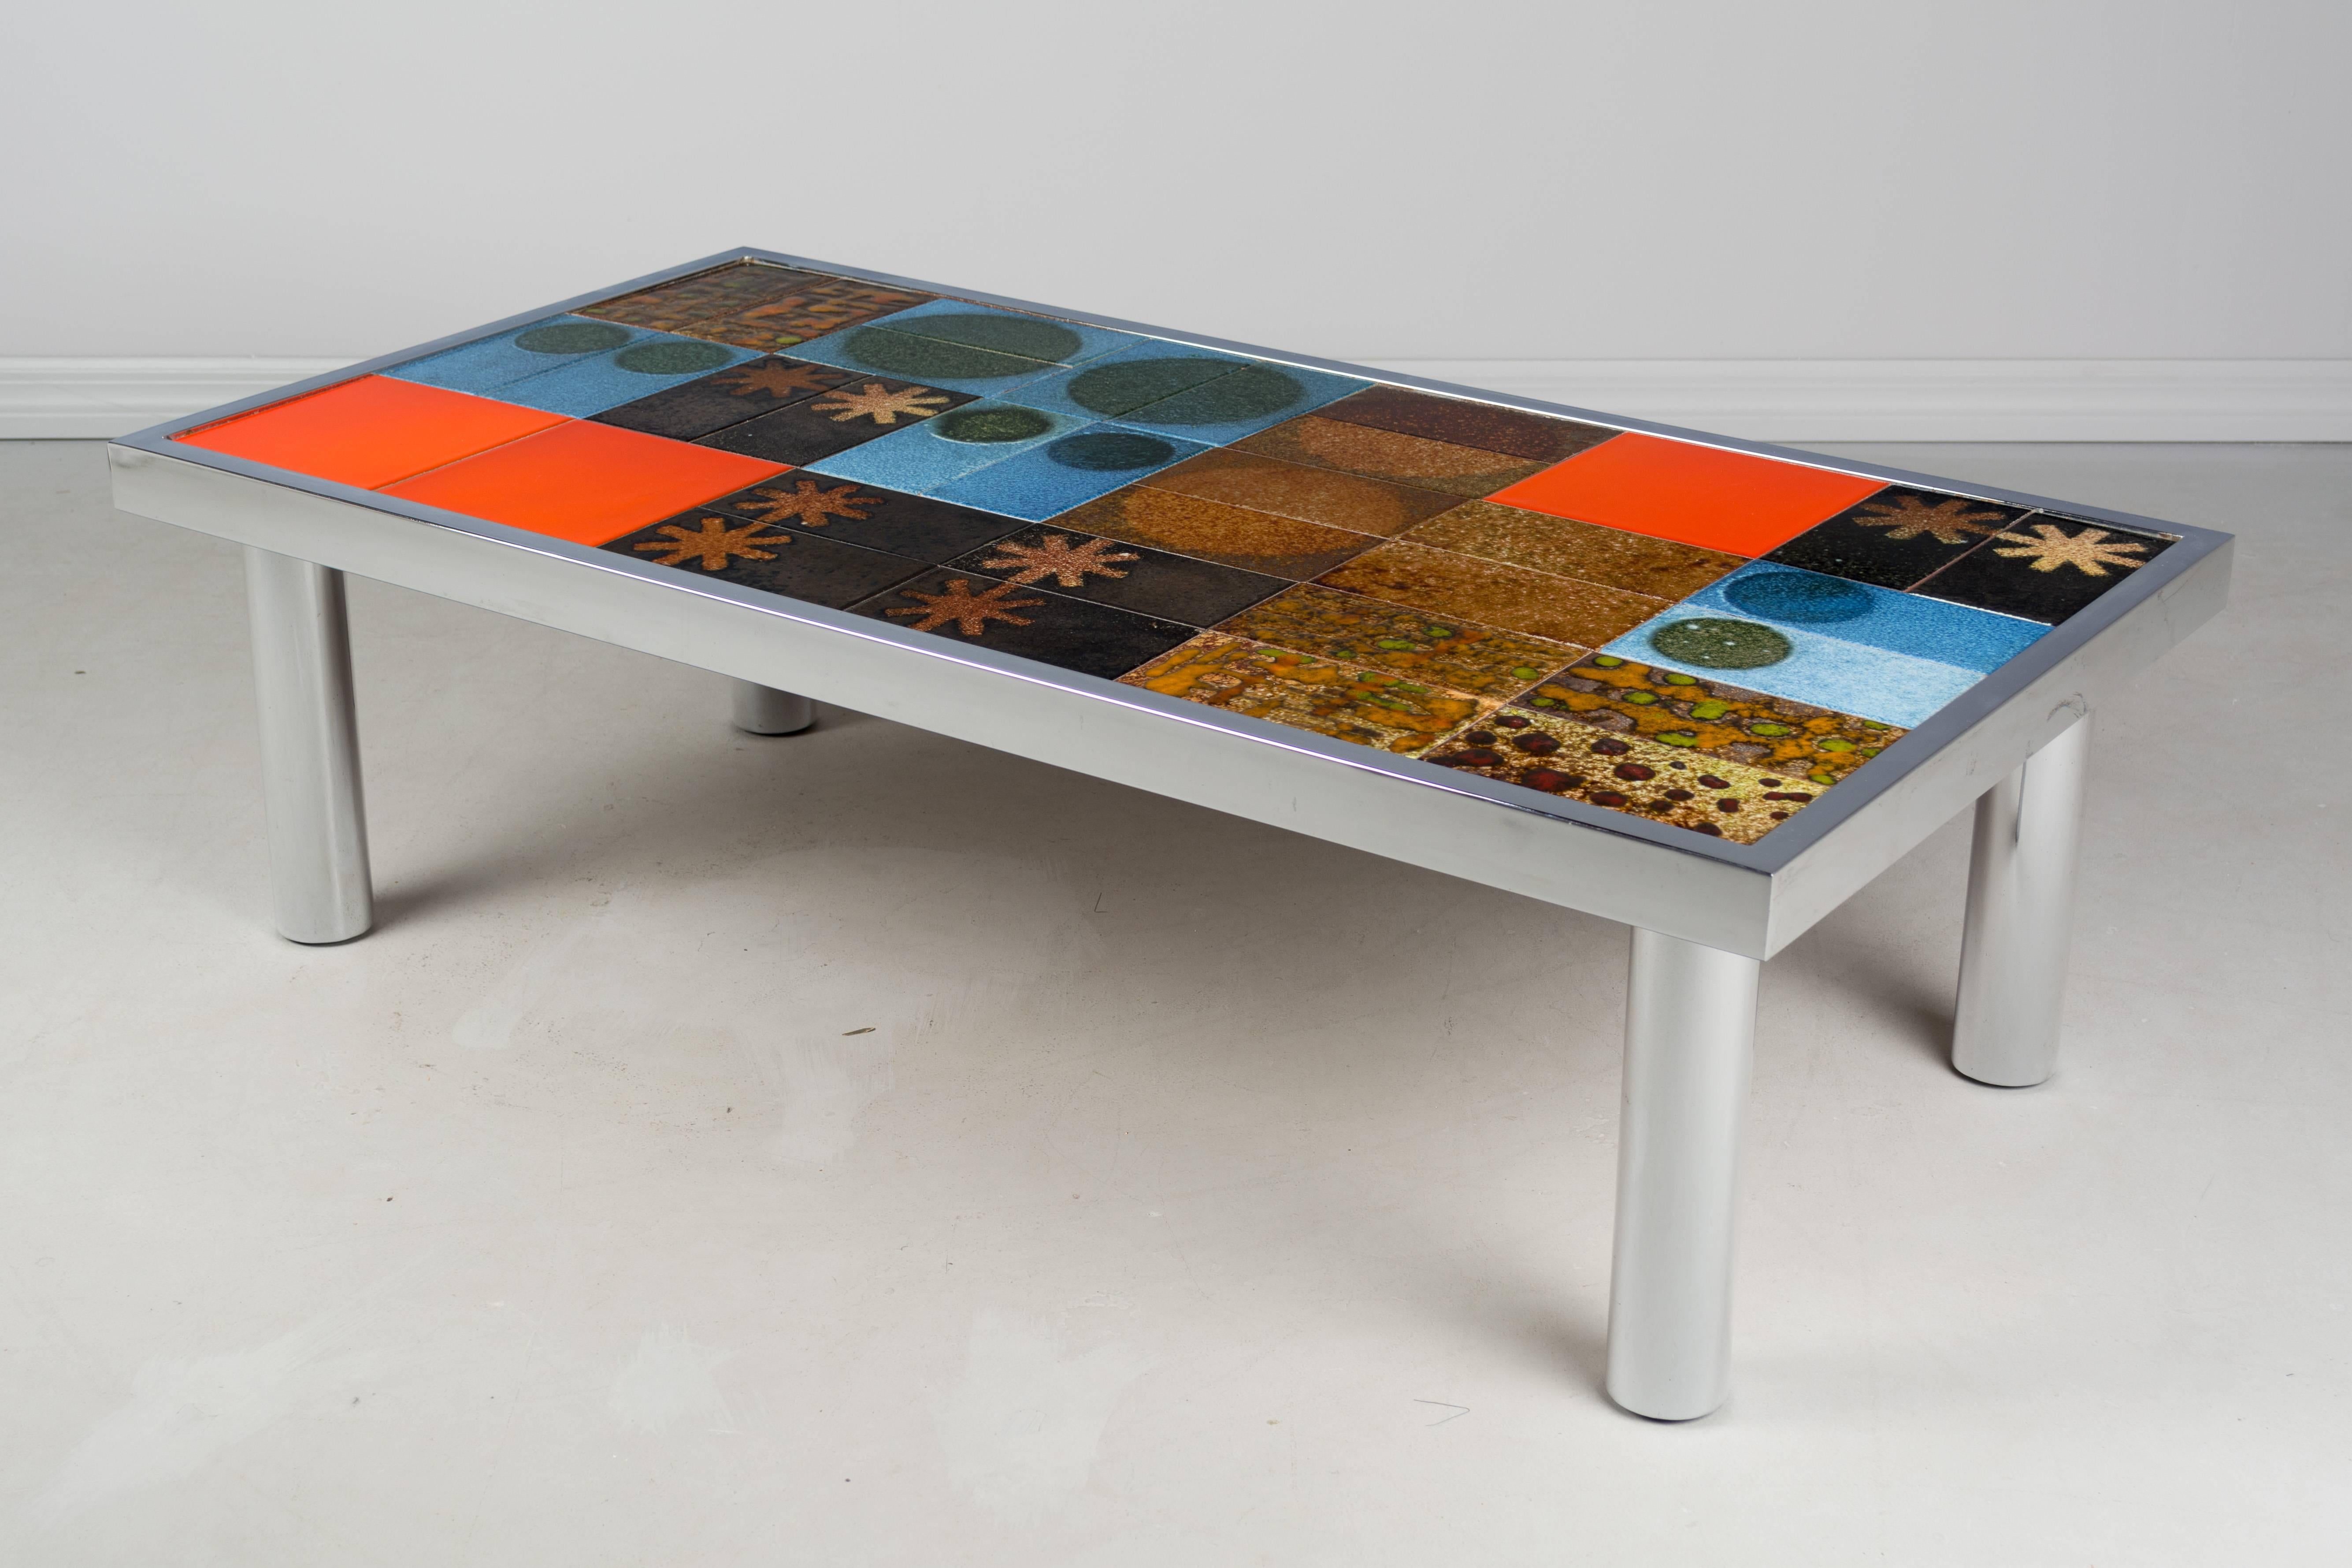 Mid-Century Modern Roger Capron style tile top coffee table with polished chrome base. Glazed ceramic tiles in vivid colors, artfully arranged in a random pattern. Heavy tubular legs with inset screws to adjust the height for the flooring surface.